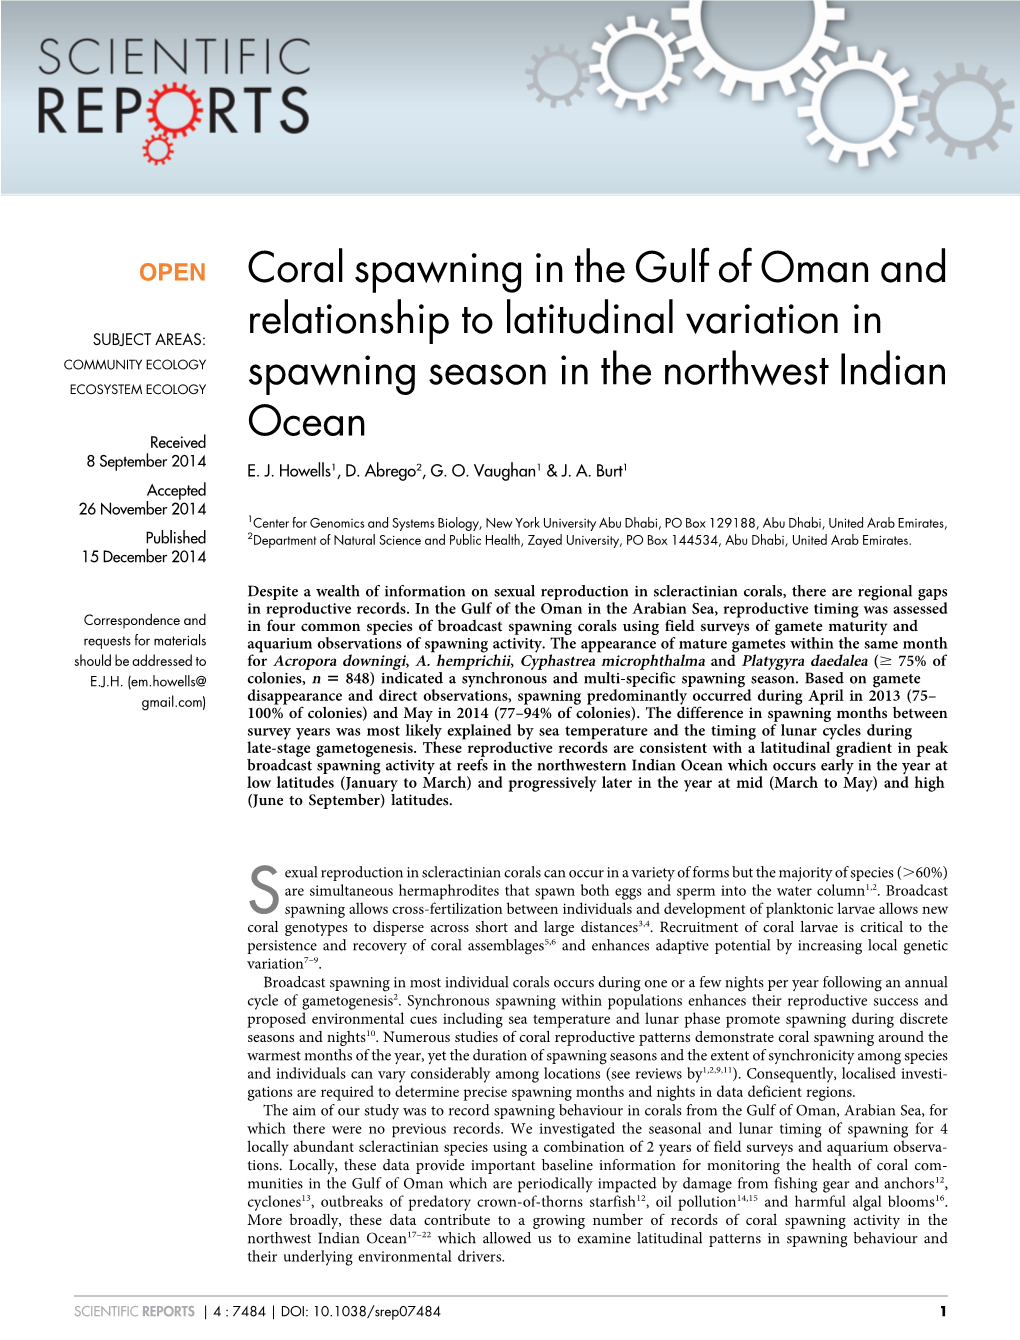 Coral Spawning in the Gulf of Oman and Relationship to Latitudinal